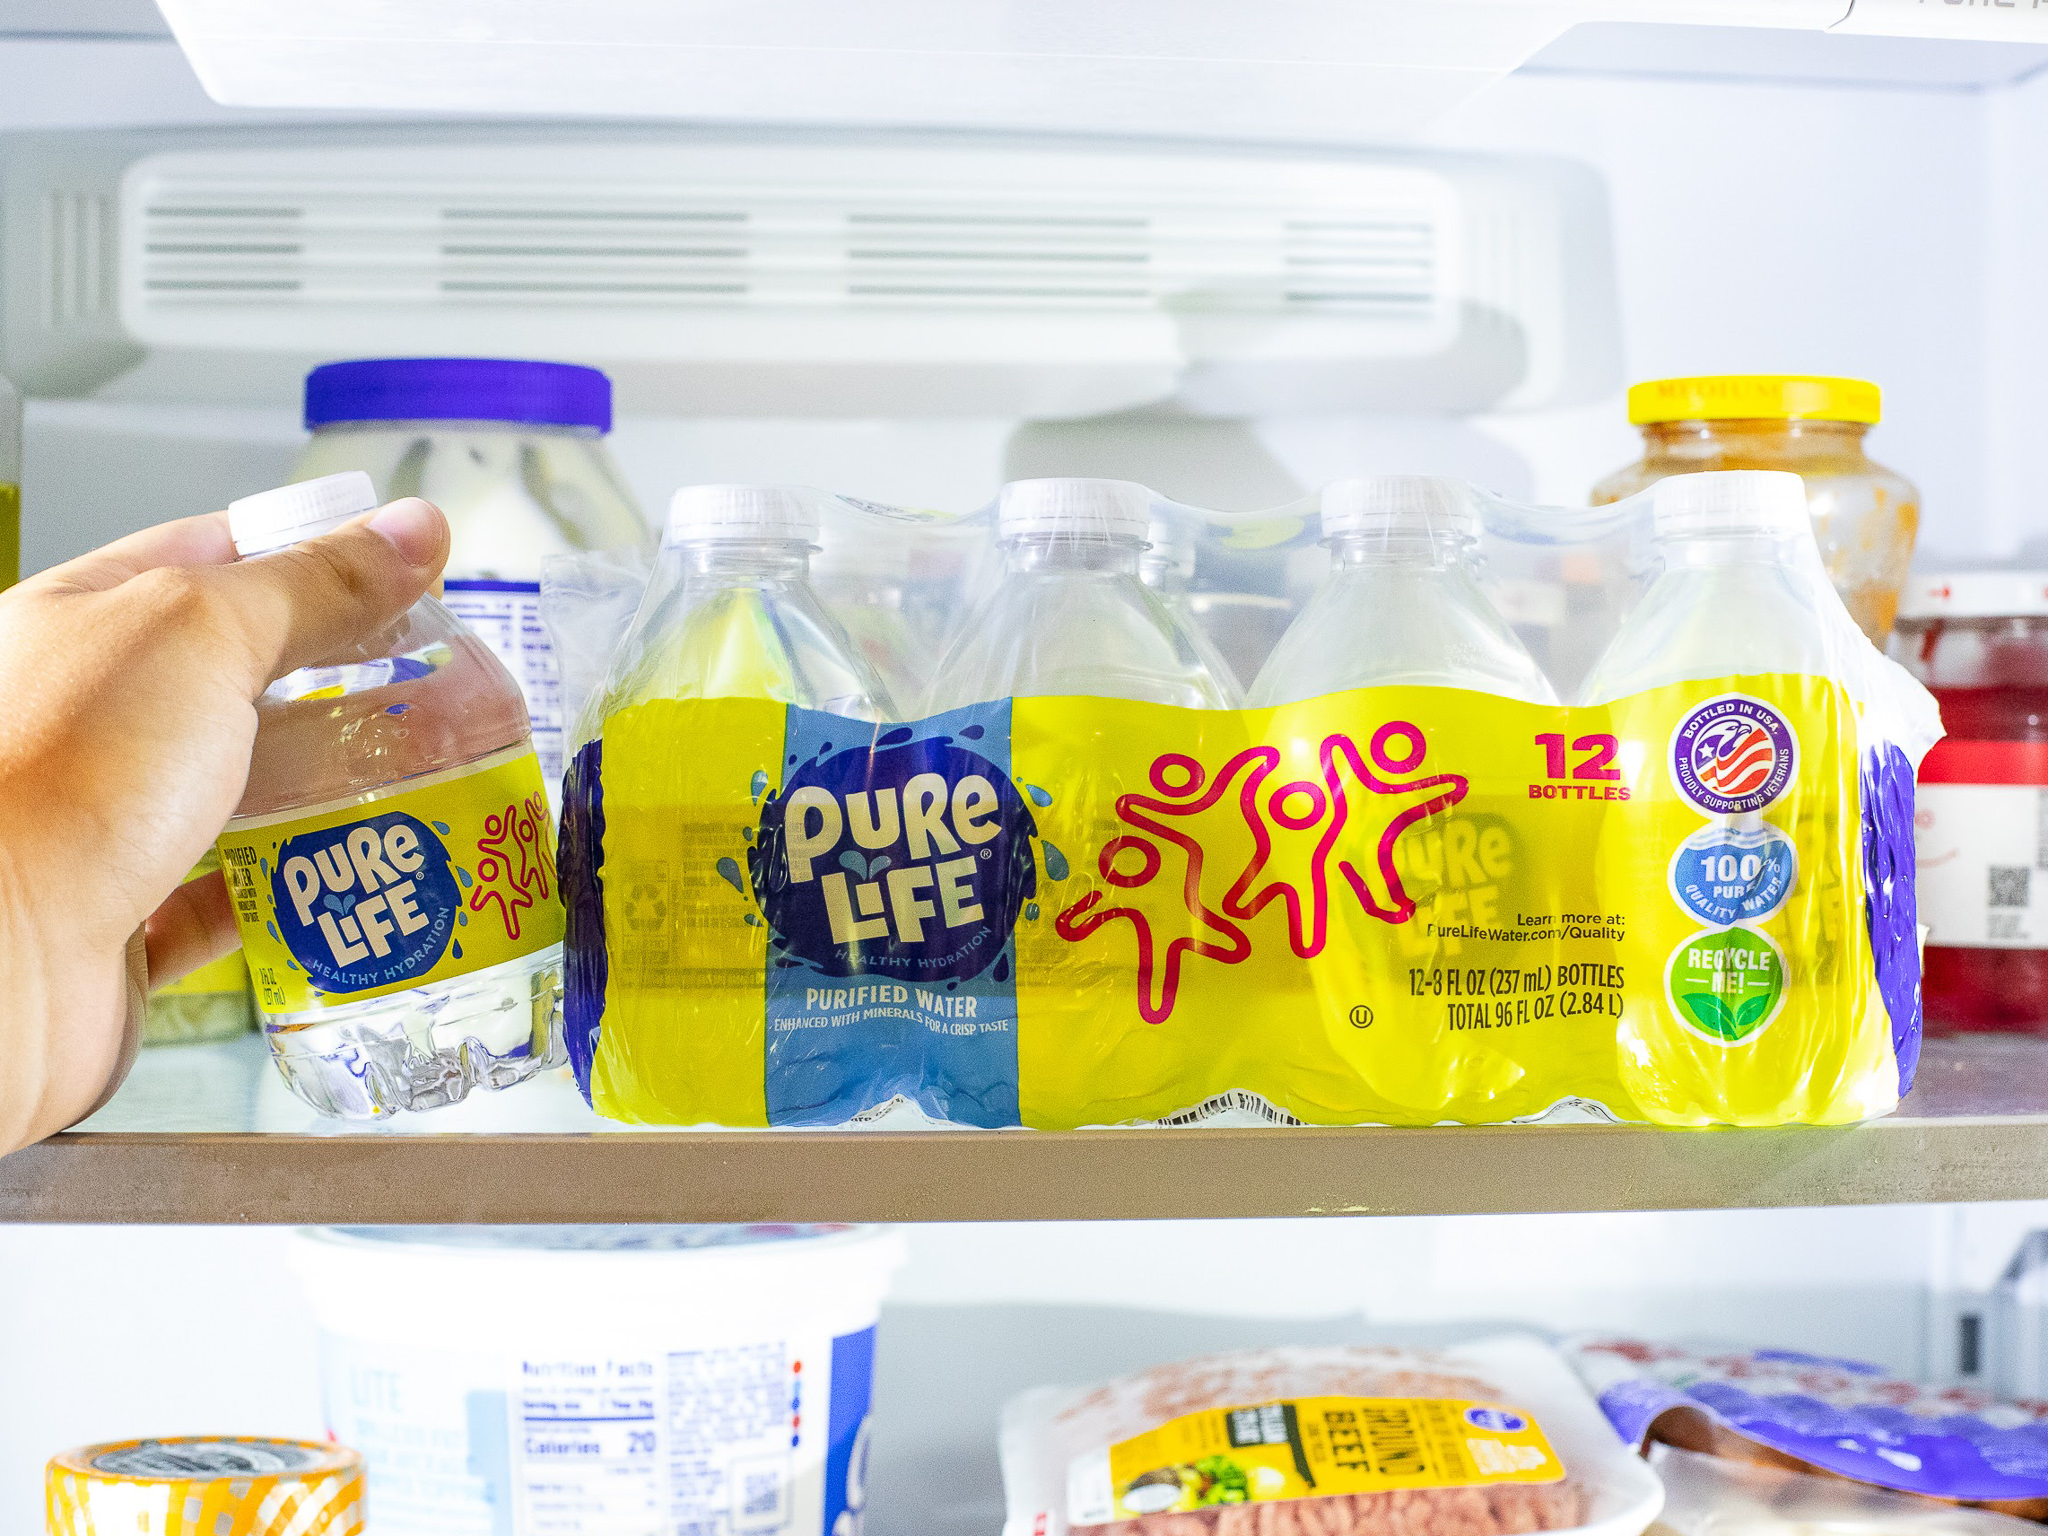 Pure Life Purified Water 12-Pack Just $1.69 At Kroger